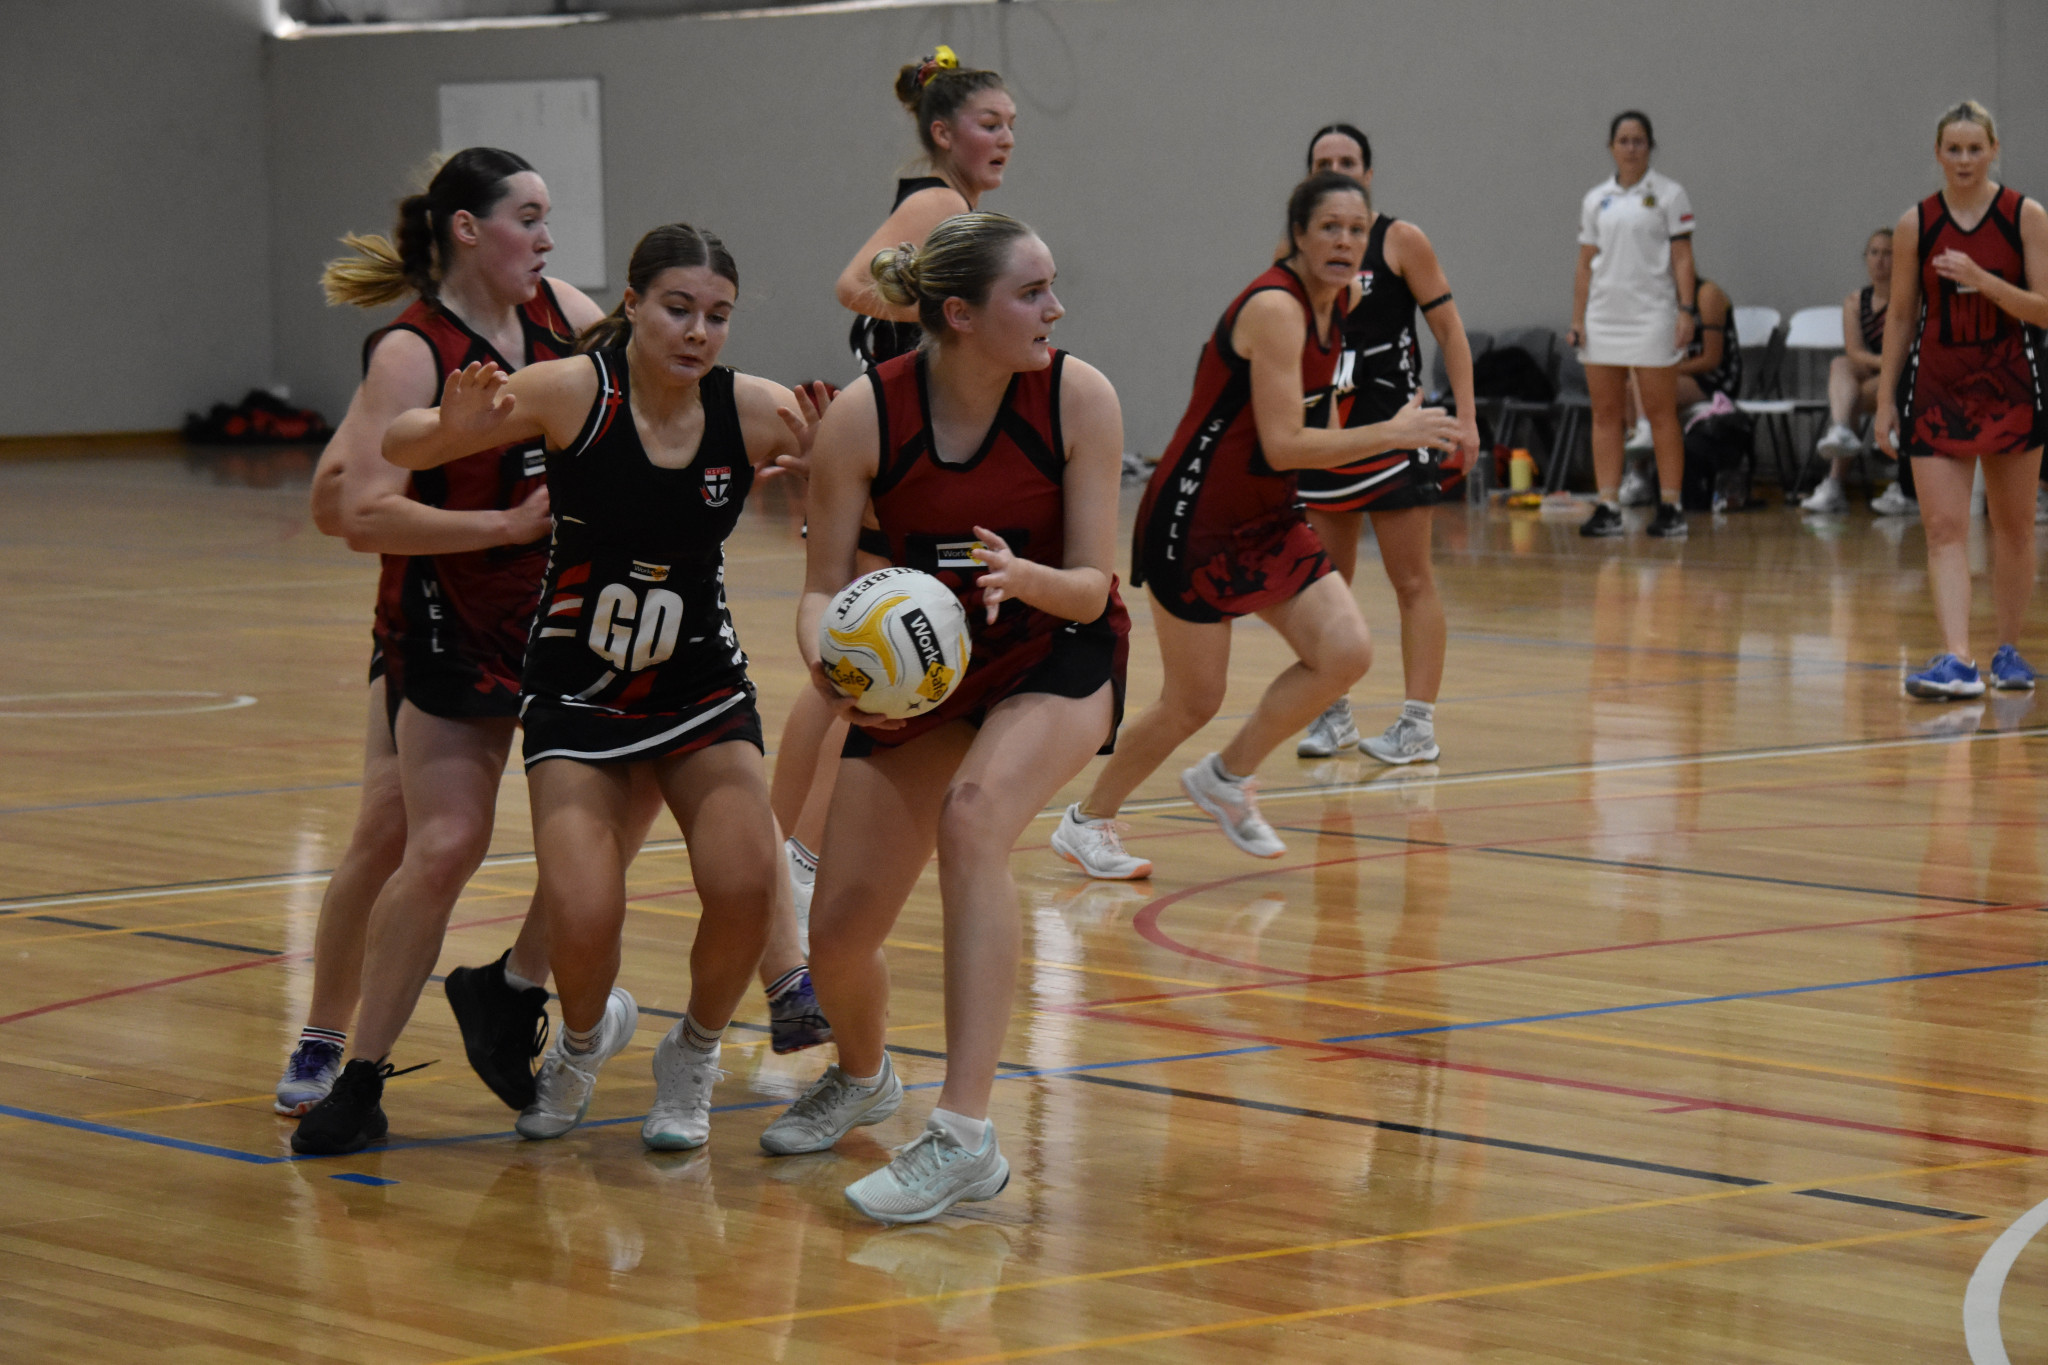 Stawell's Ebony Summers looks to pass the ball.